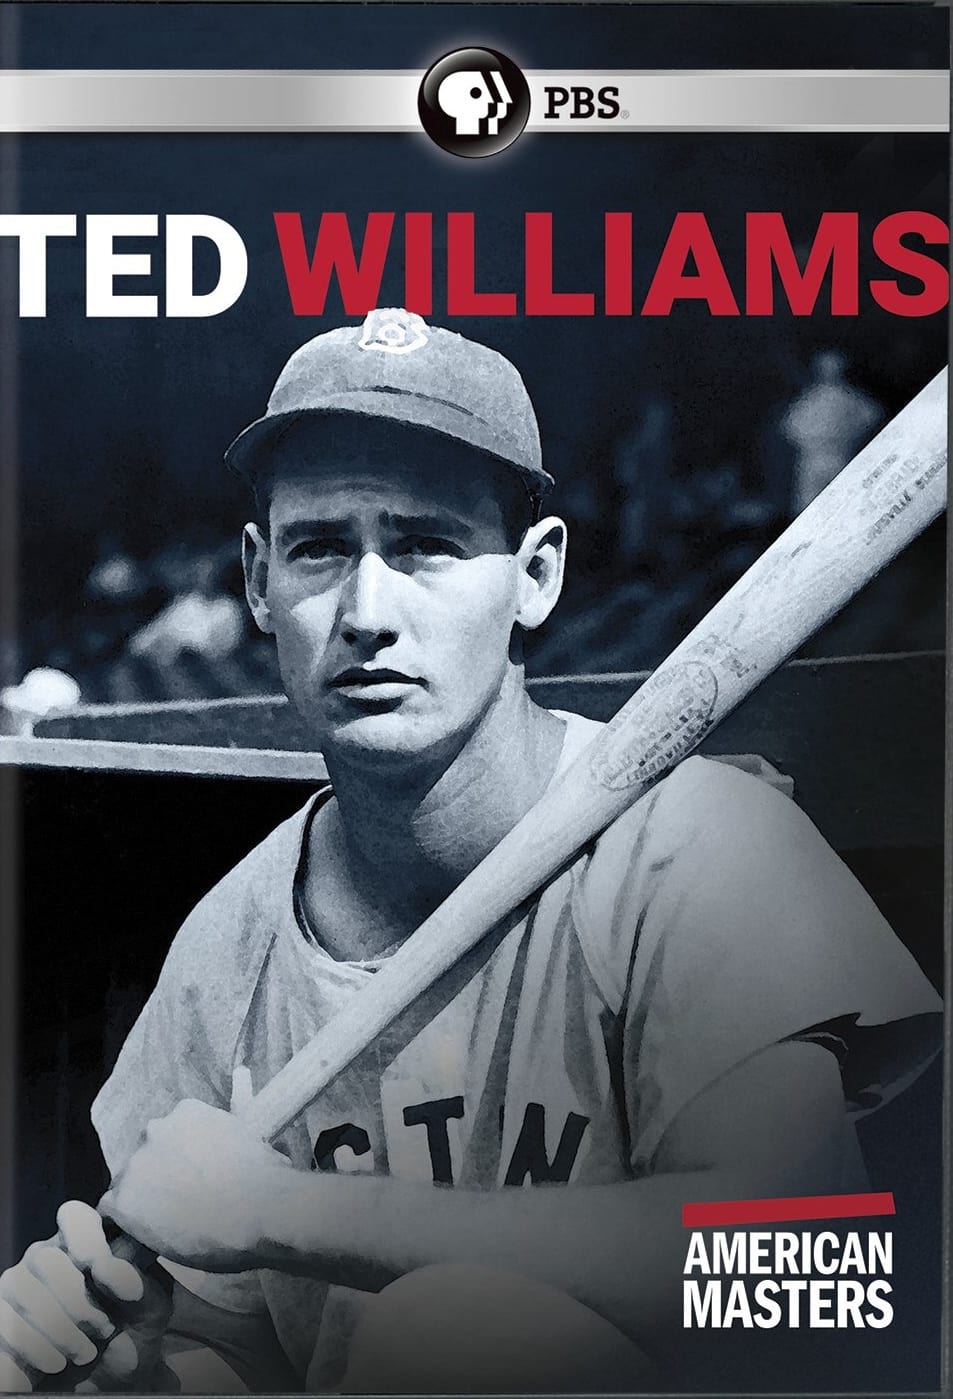 Ted Williams: "The Greatest Hitter Who Ever Lived"